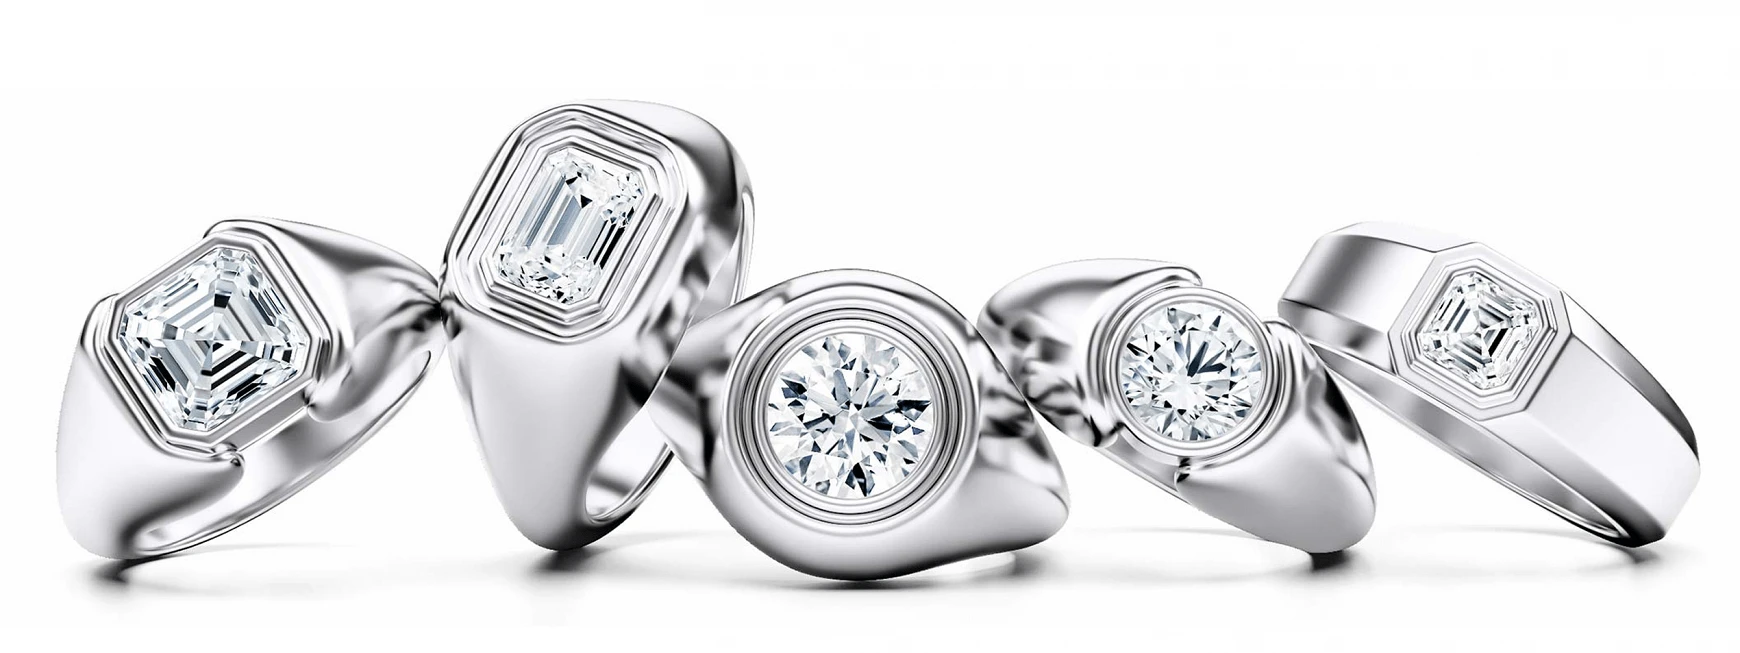 GS Diamonds Introduces Three Men’s Diamond Engagement Ring Collections to Celebrate Marriage Equality.